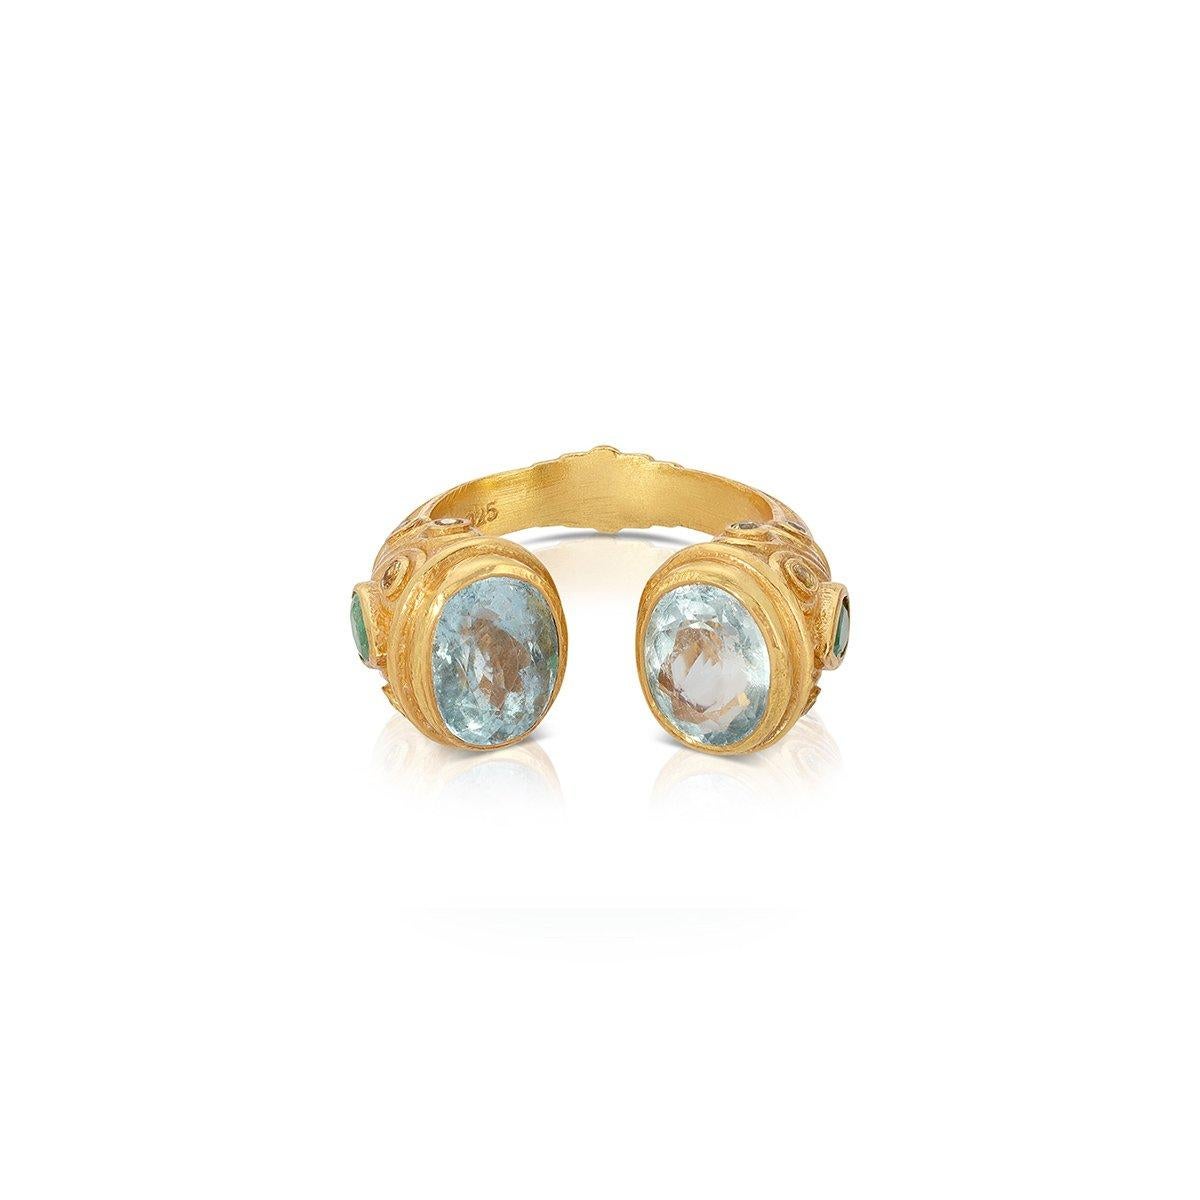 A contemporary interpretation of the opulent jewelry style of the Moguls... An Aquamarine ring featuring an open ended band tipped with fiery Aquamarines and pear shaped Emeralds on the side of the ring. 

- Natural Aquamarines weight approx 4.9